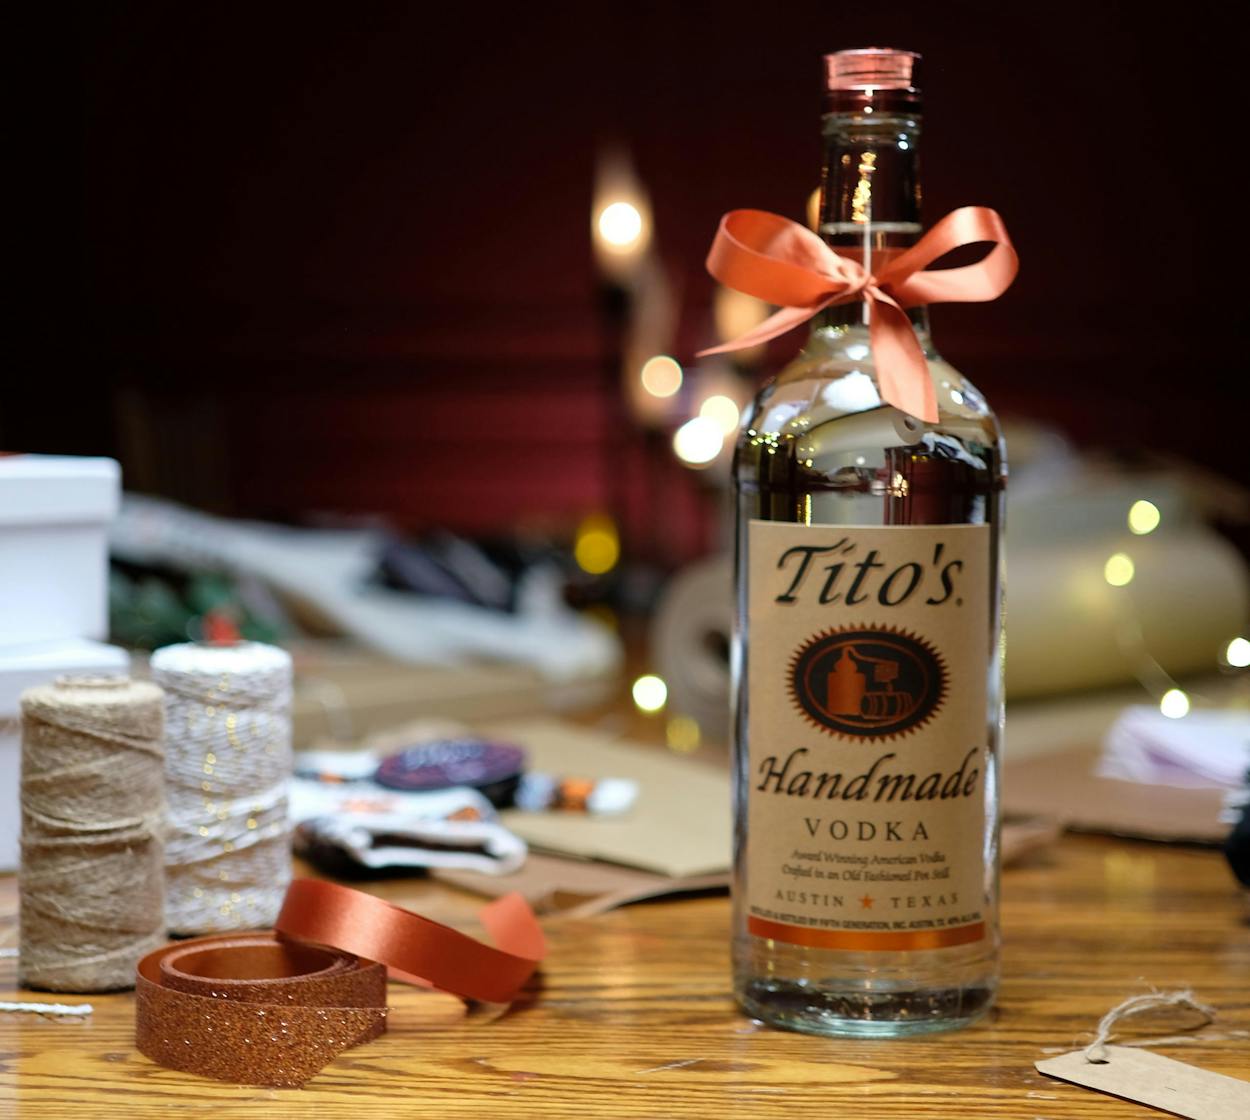 Tito's bottle ready for gift-wrapping.